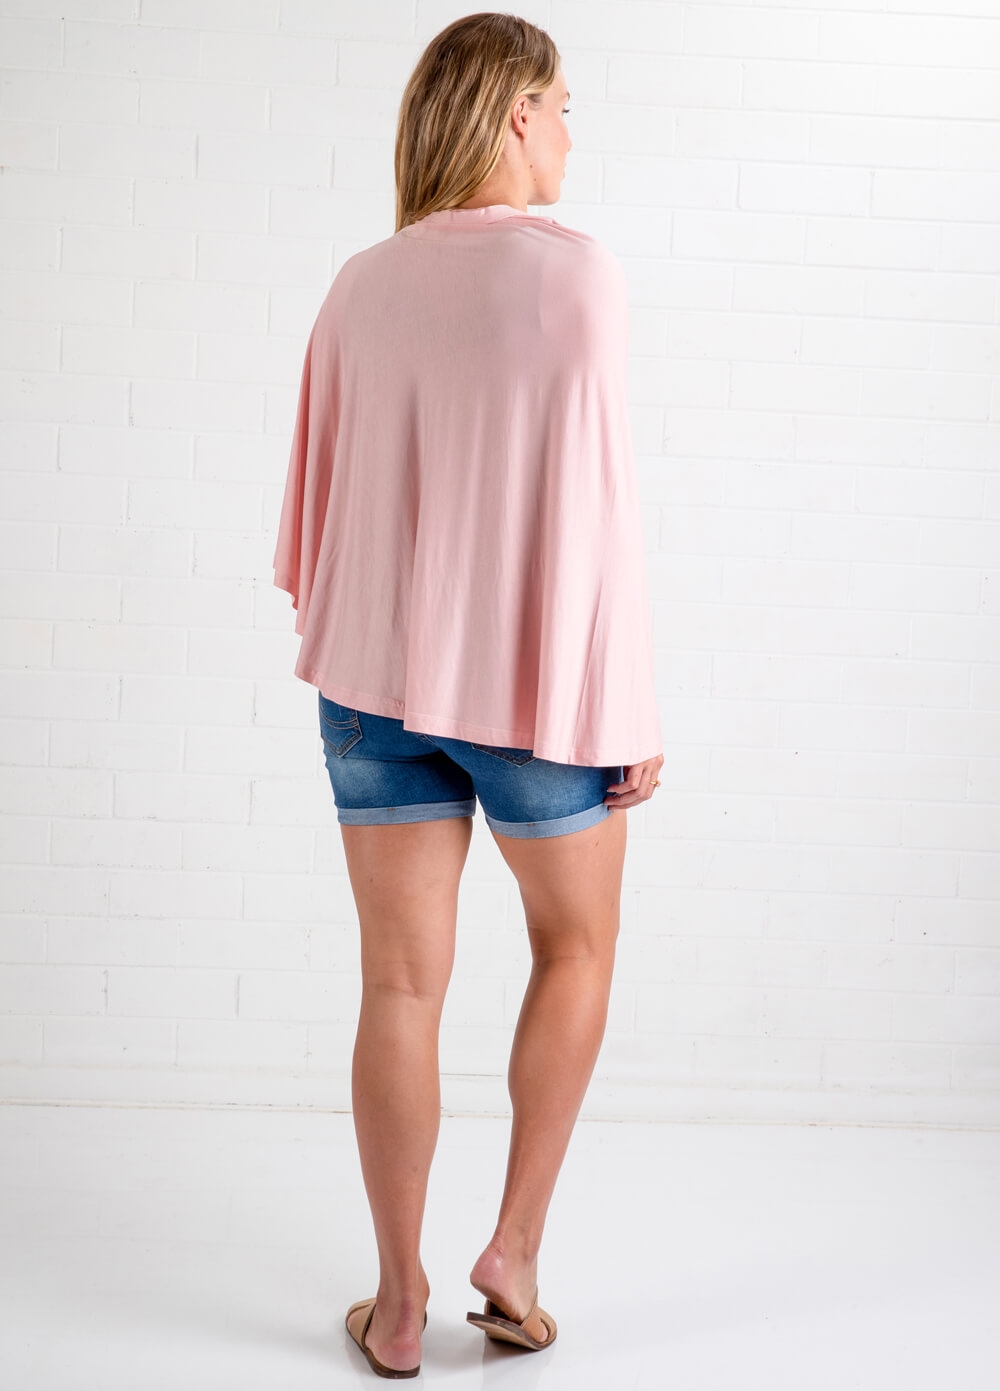 Lait & Co - Memoire Nursing Cover Shawl in Pink | Queen Bee